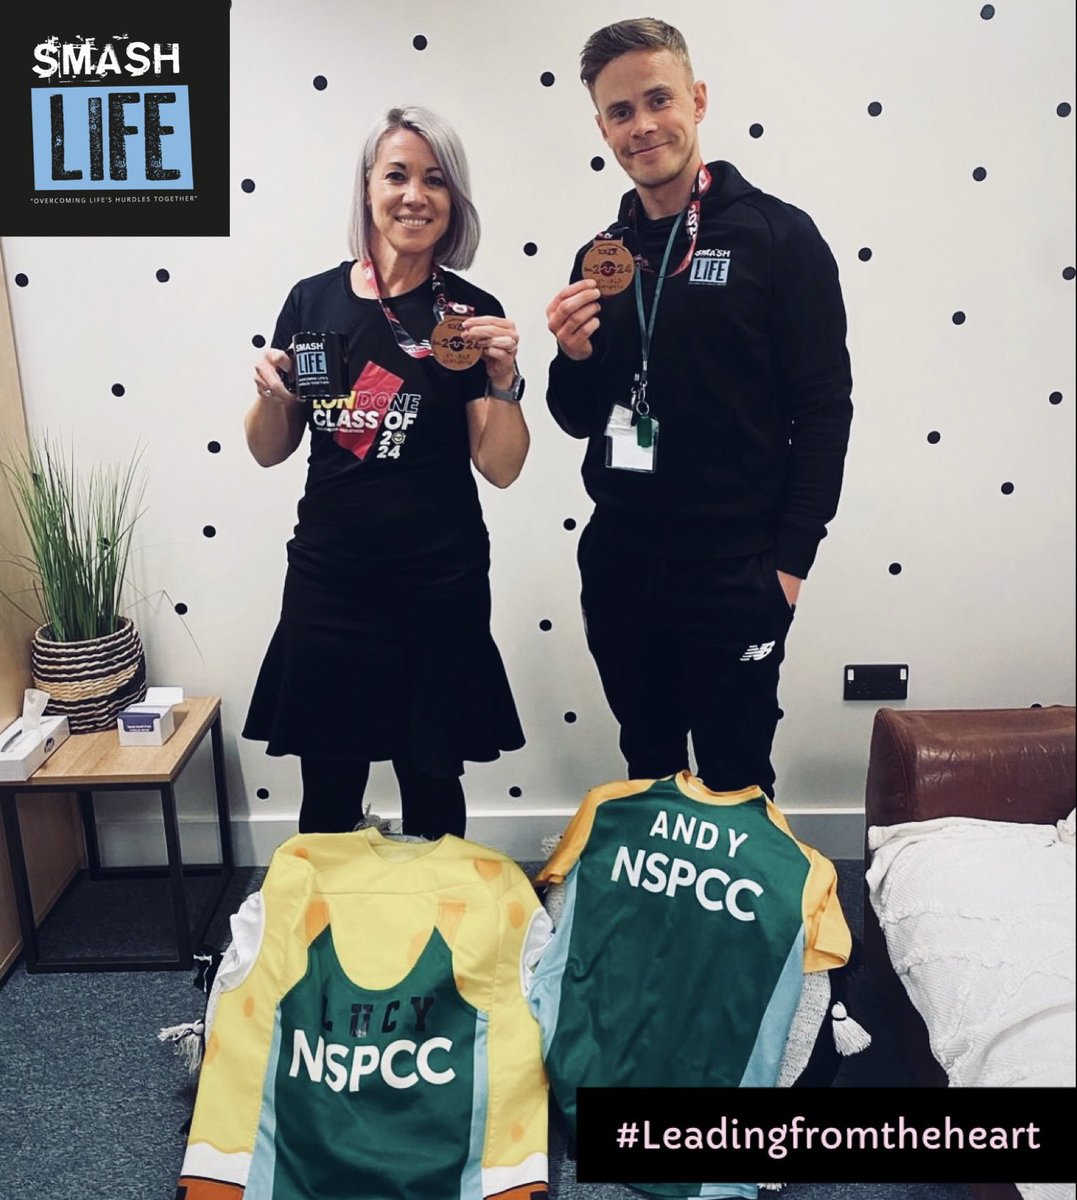 💥Smash Life💥 Smash Life Superhero 🦸‍♀️ We observe, witness and feel practice every day One of our first recipients of the Smash Life mug is the amazing Mrs Cowan from @LightmoorPri - calm, caring, child centred and above all happy children… Such a great school to work with